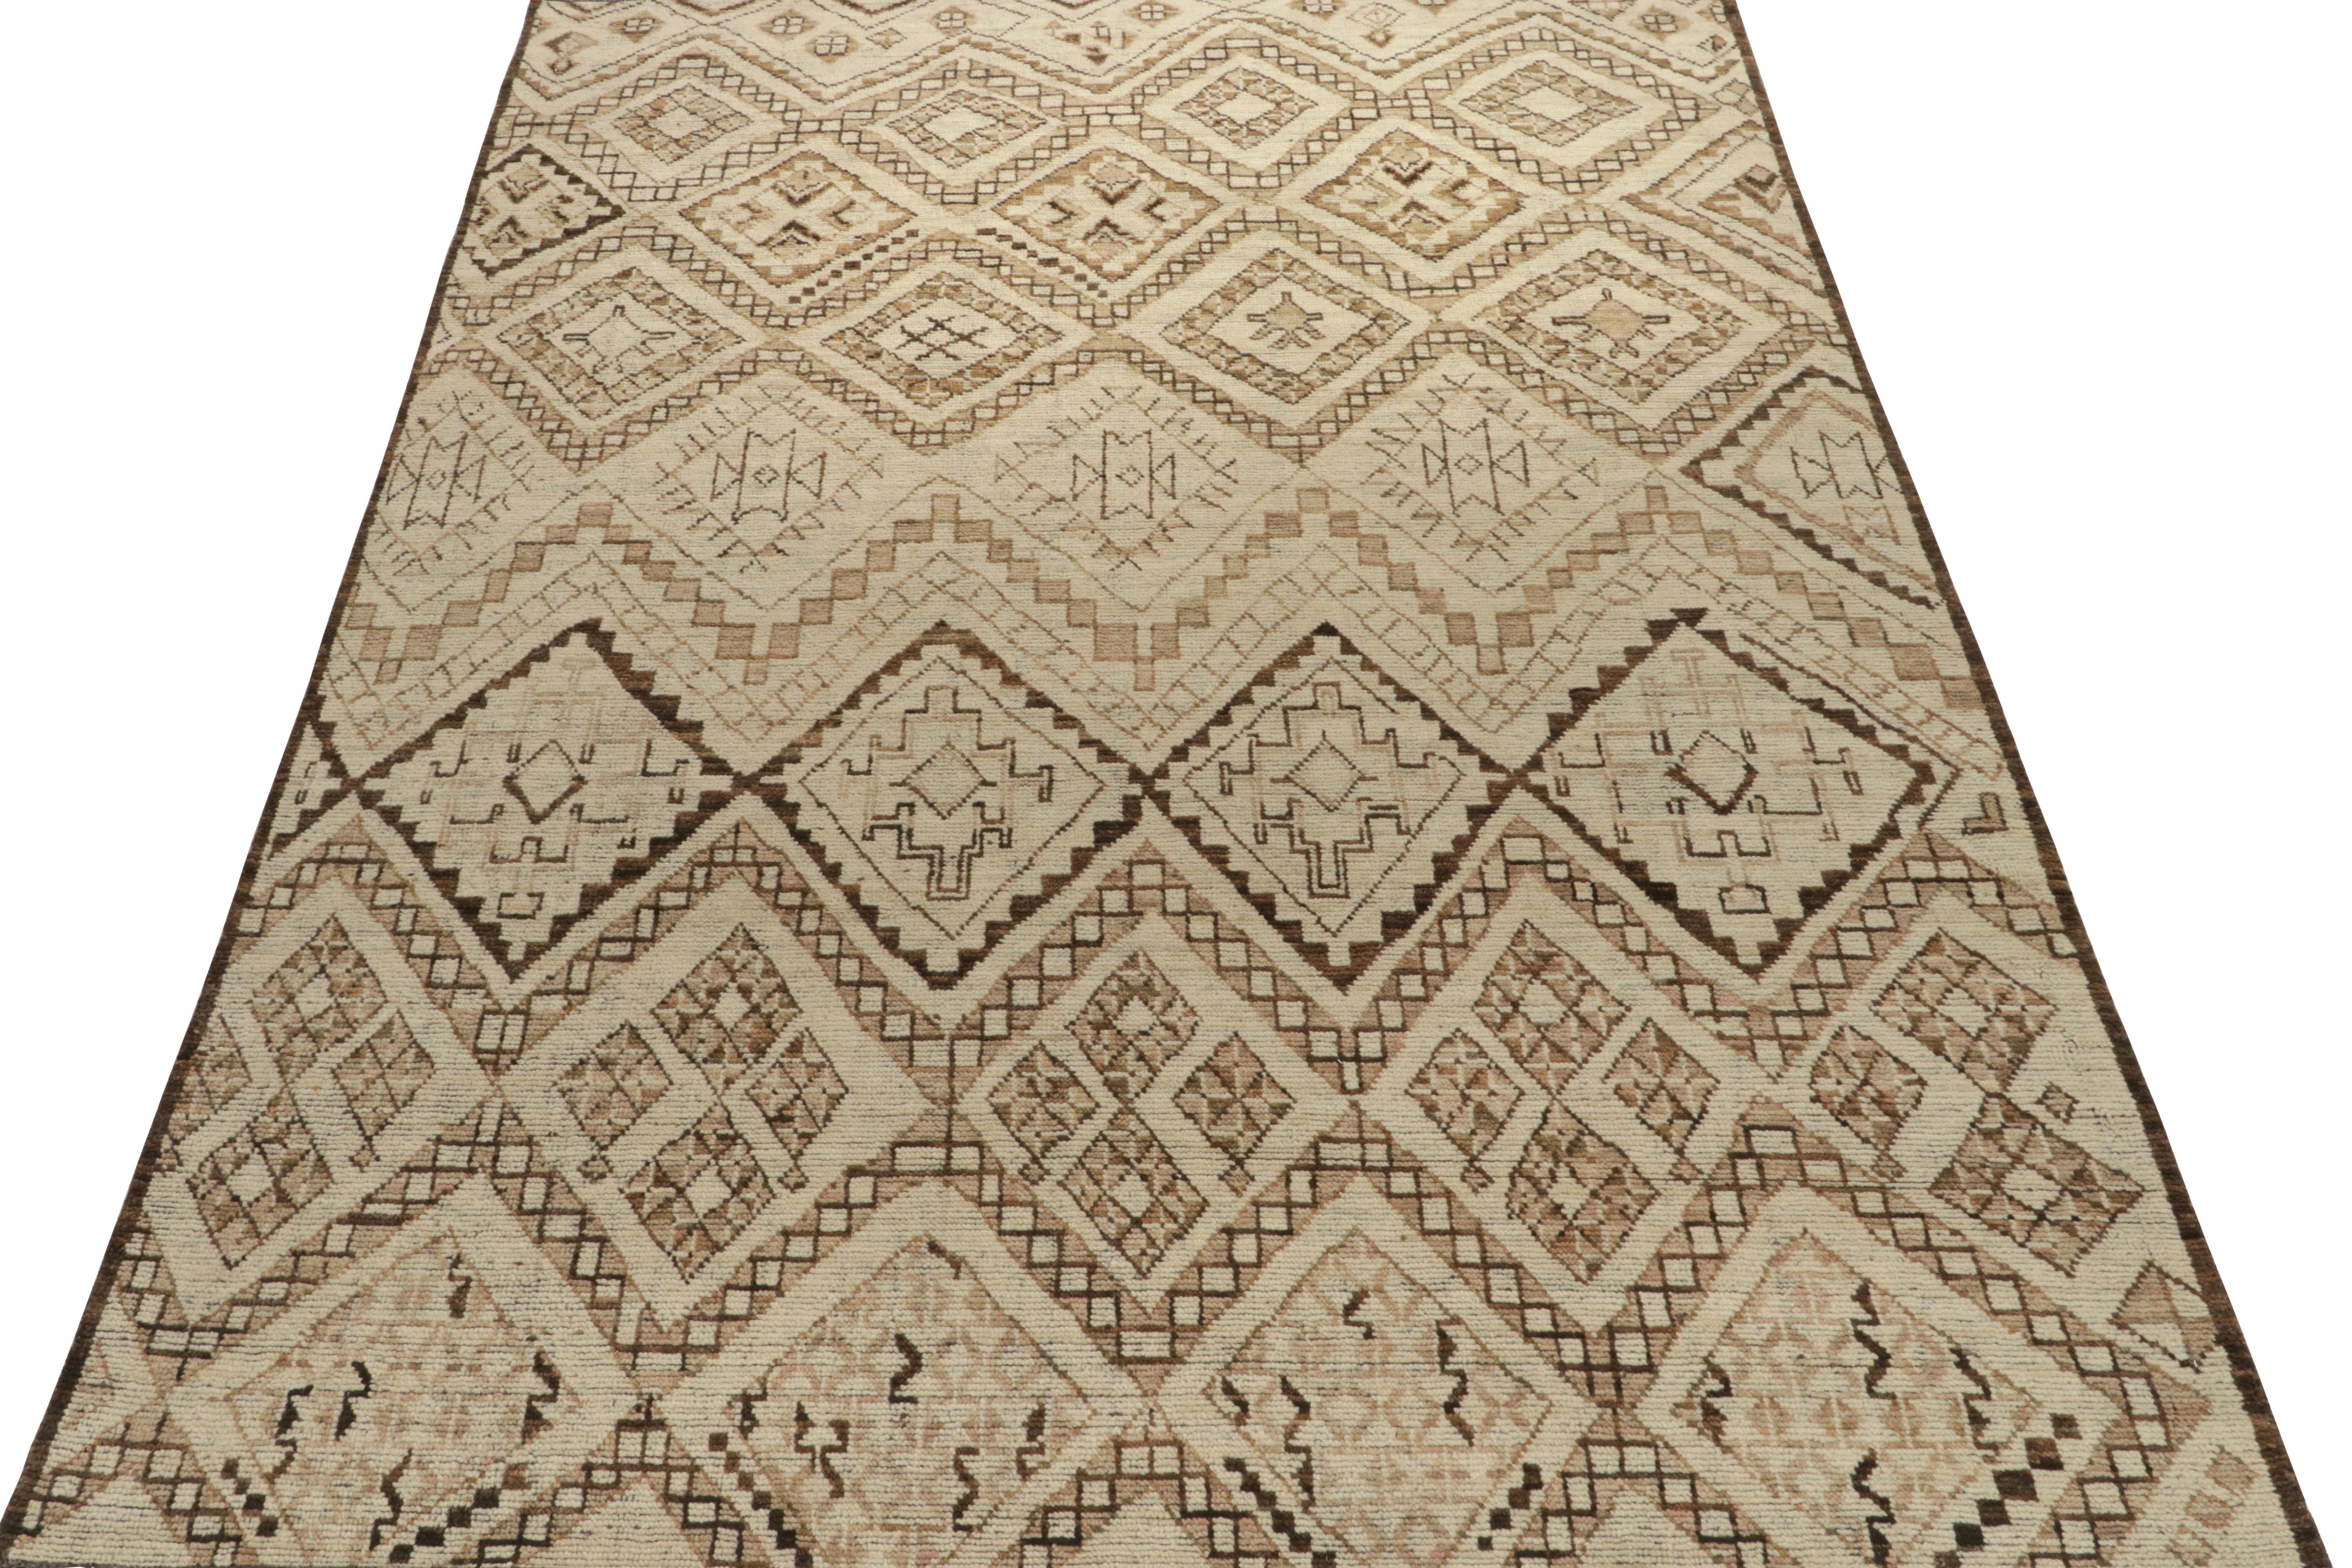 Indian Rug & Kilim’s Moroccan Style Rug in Beige-Brown Tribal Geometric Patterns For Sale